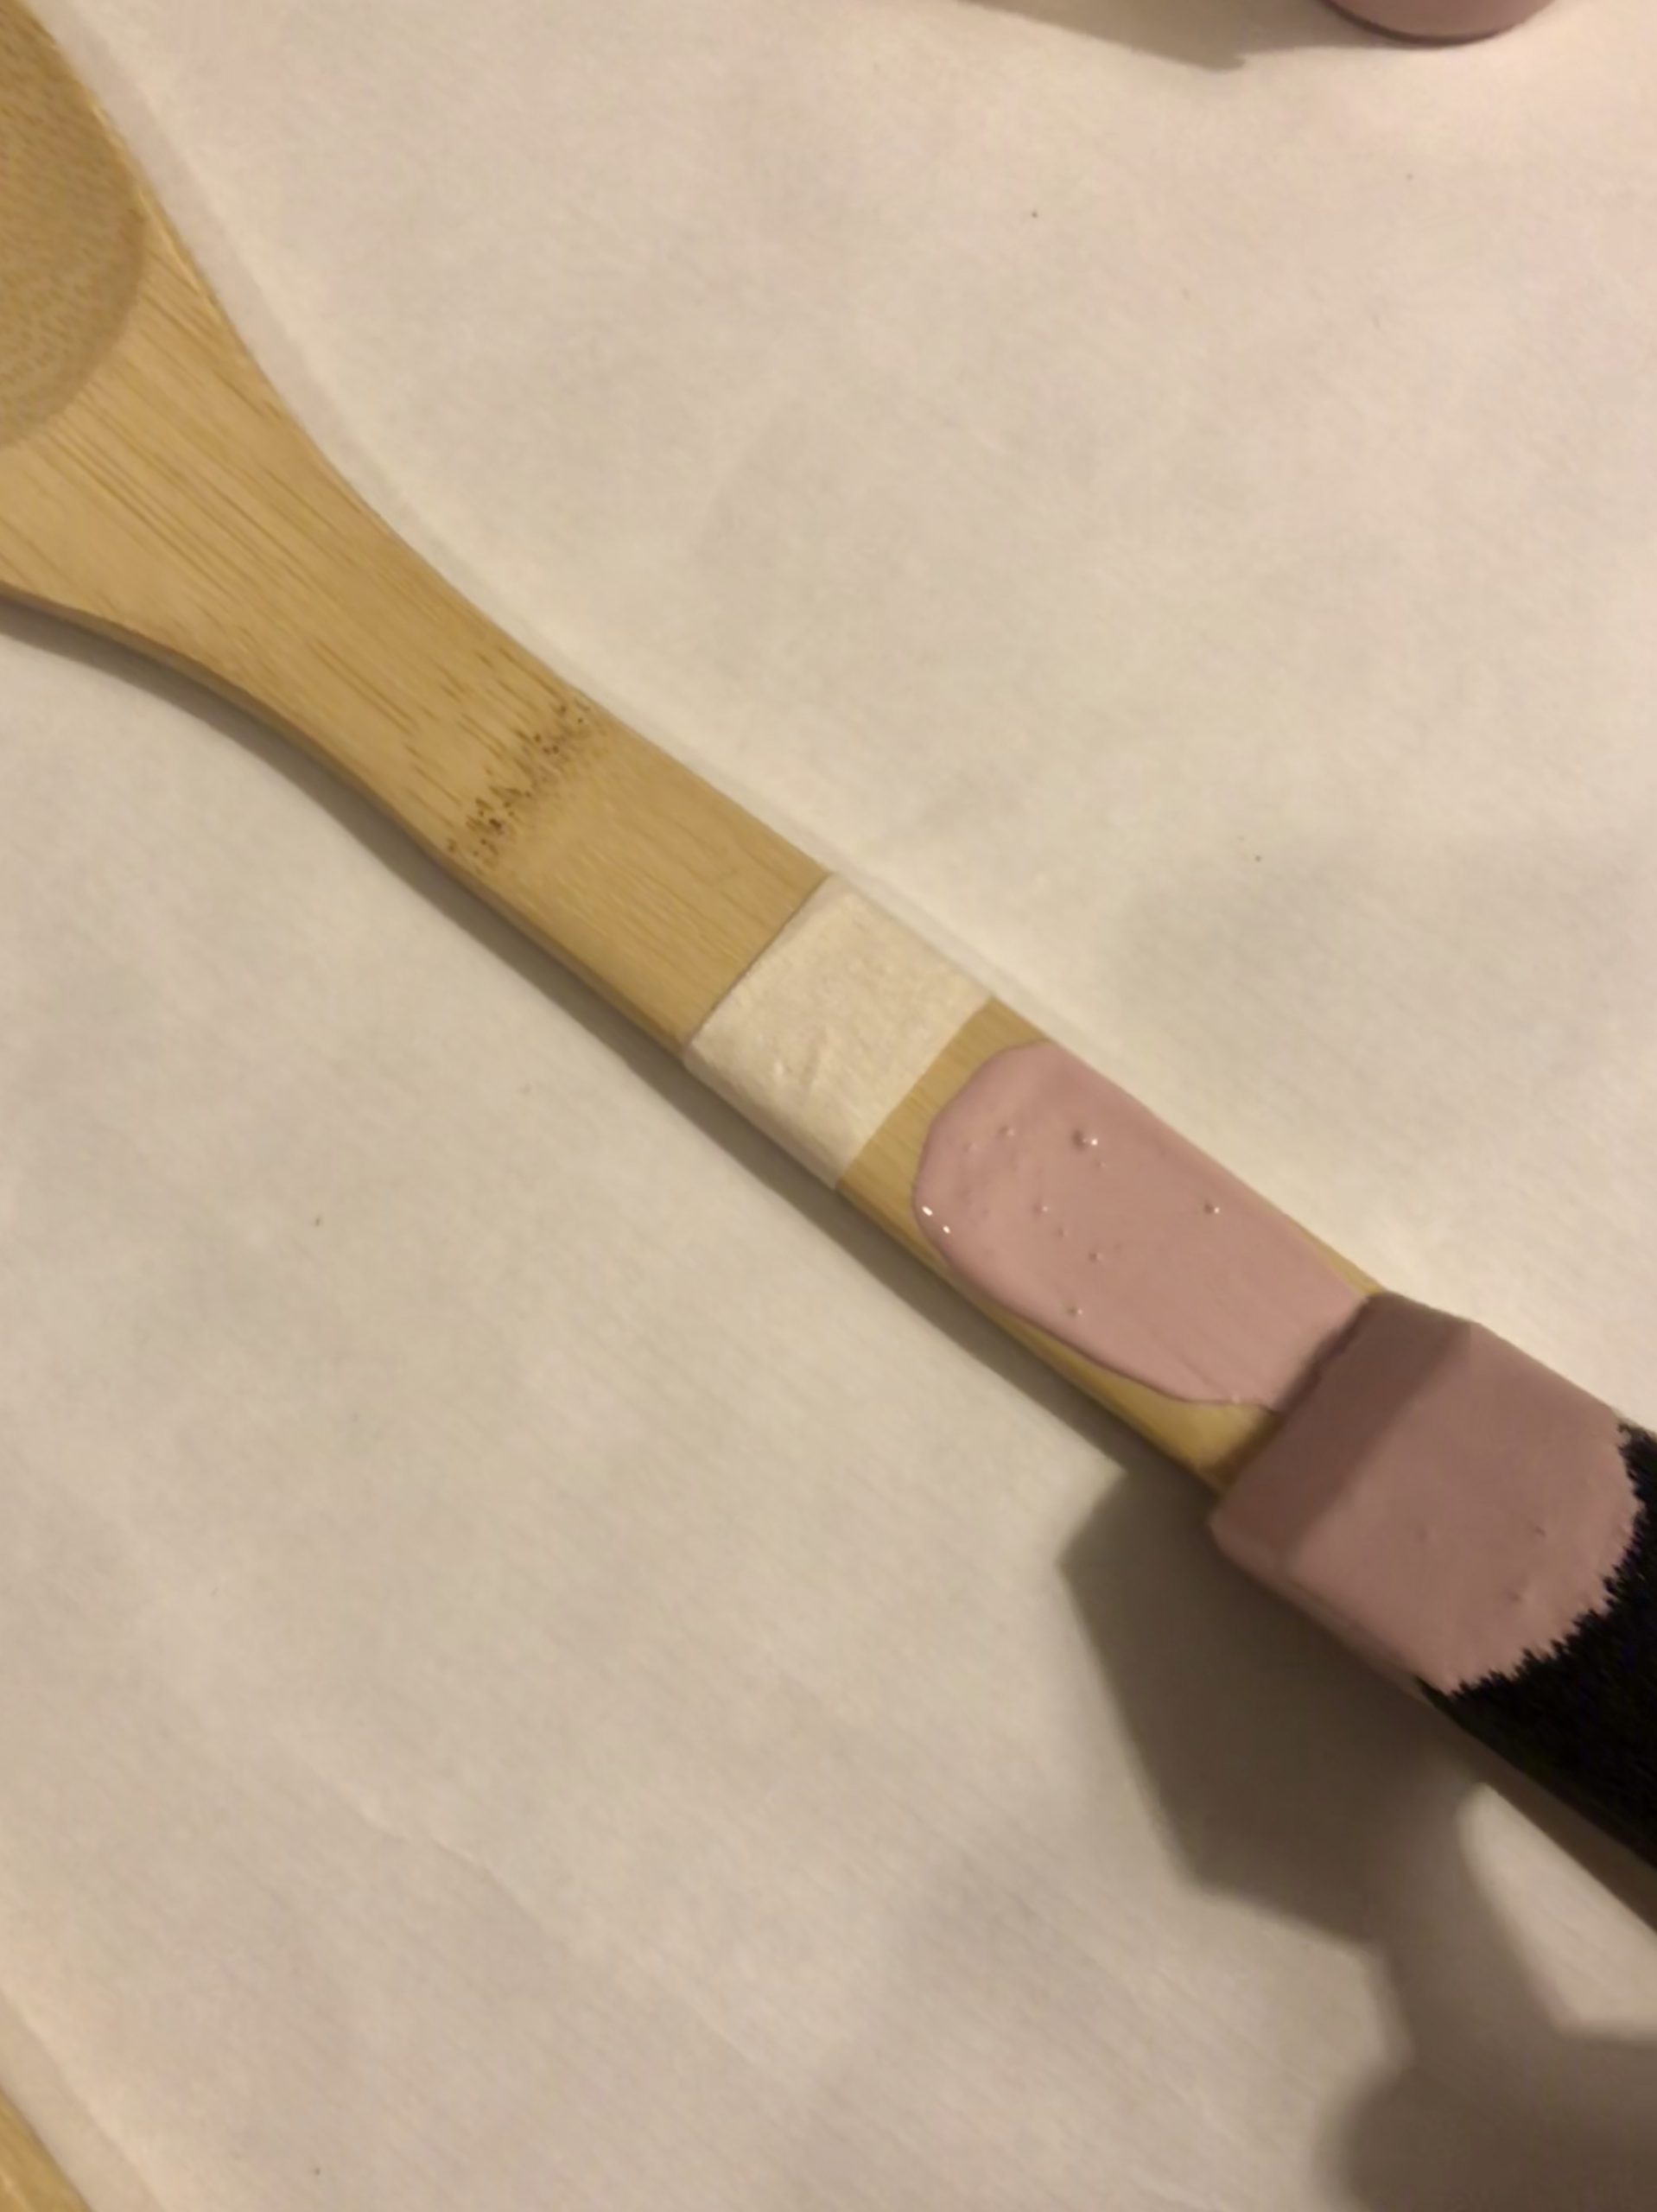 A close up view of one utensil showing someone starting to paint.